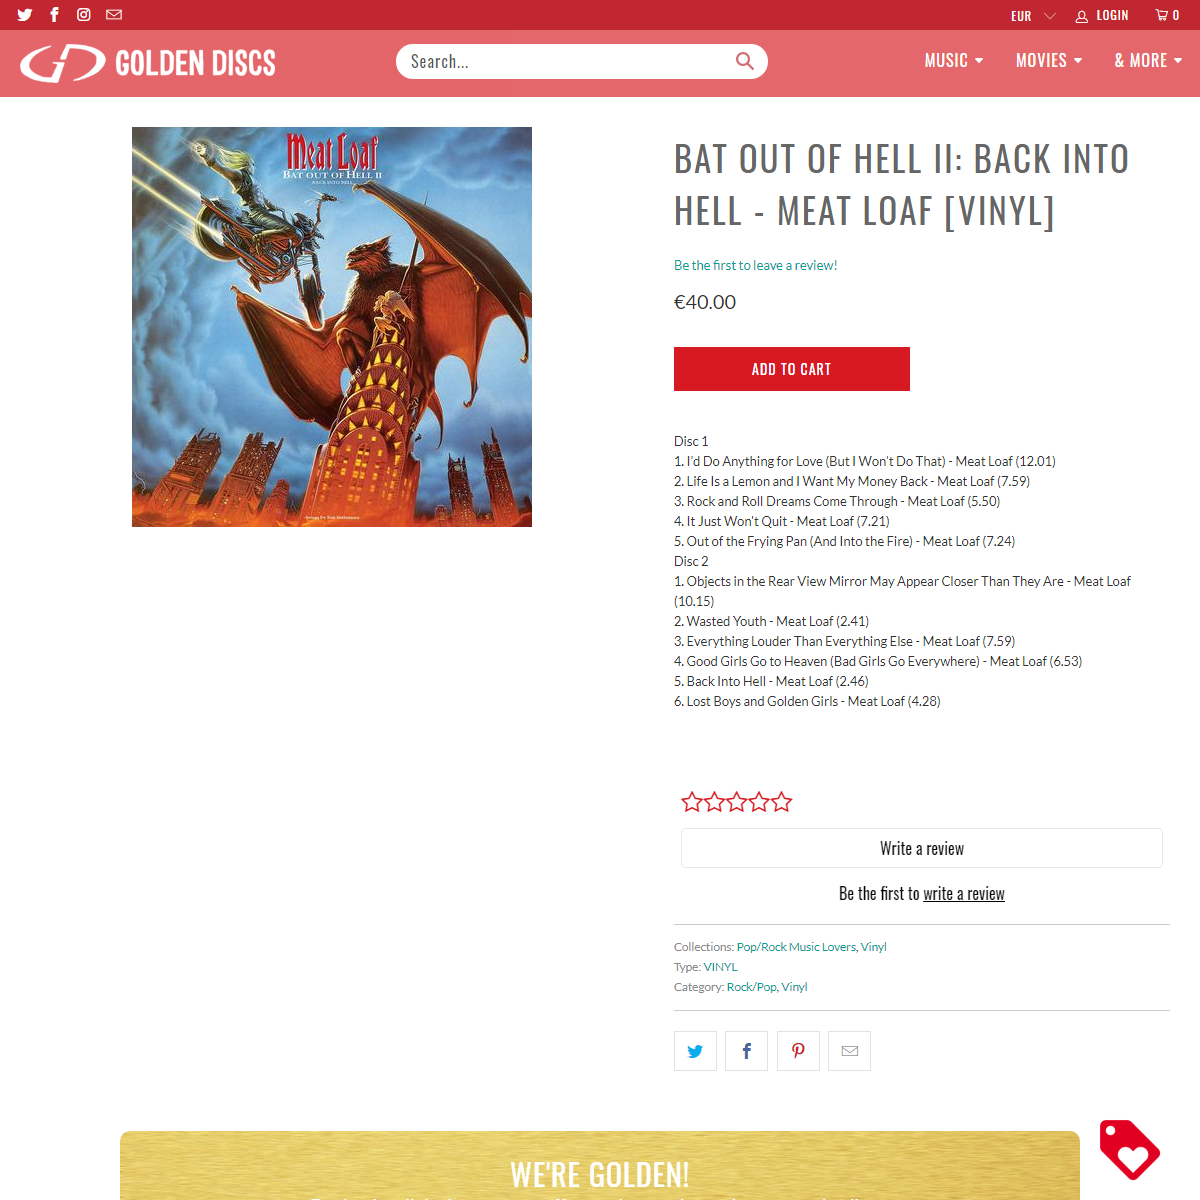 Bat Out of Hell II- Back Into Hell - Meat Loaf [VINYL] - Golden Discs